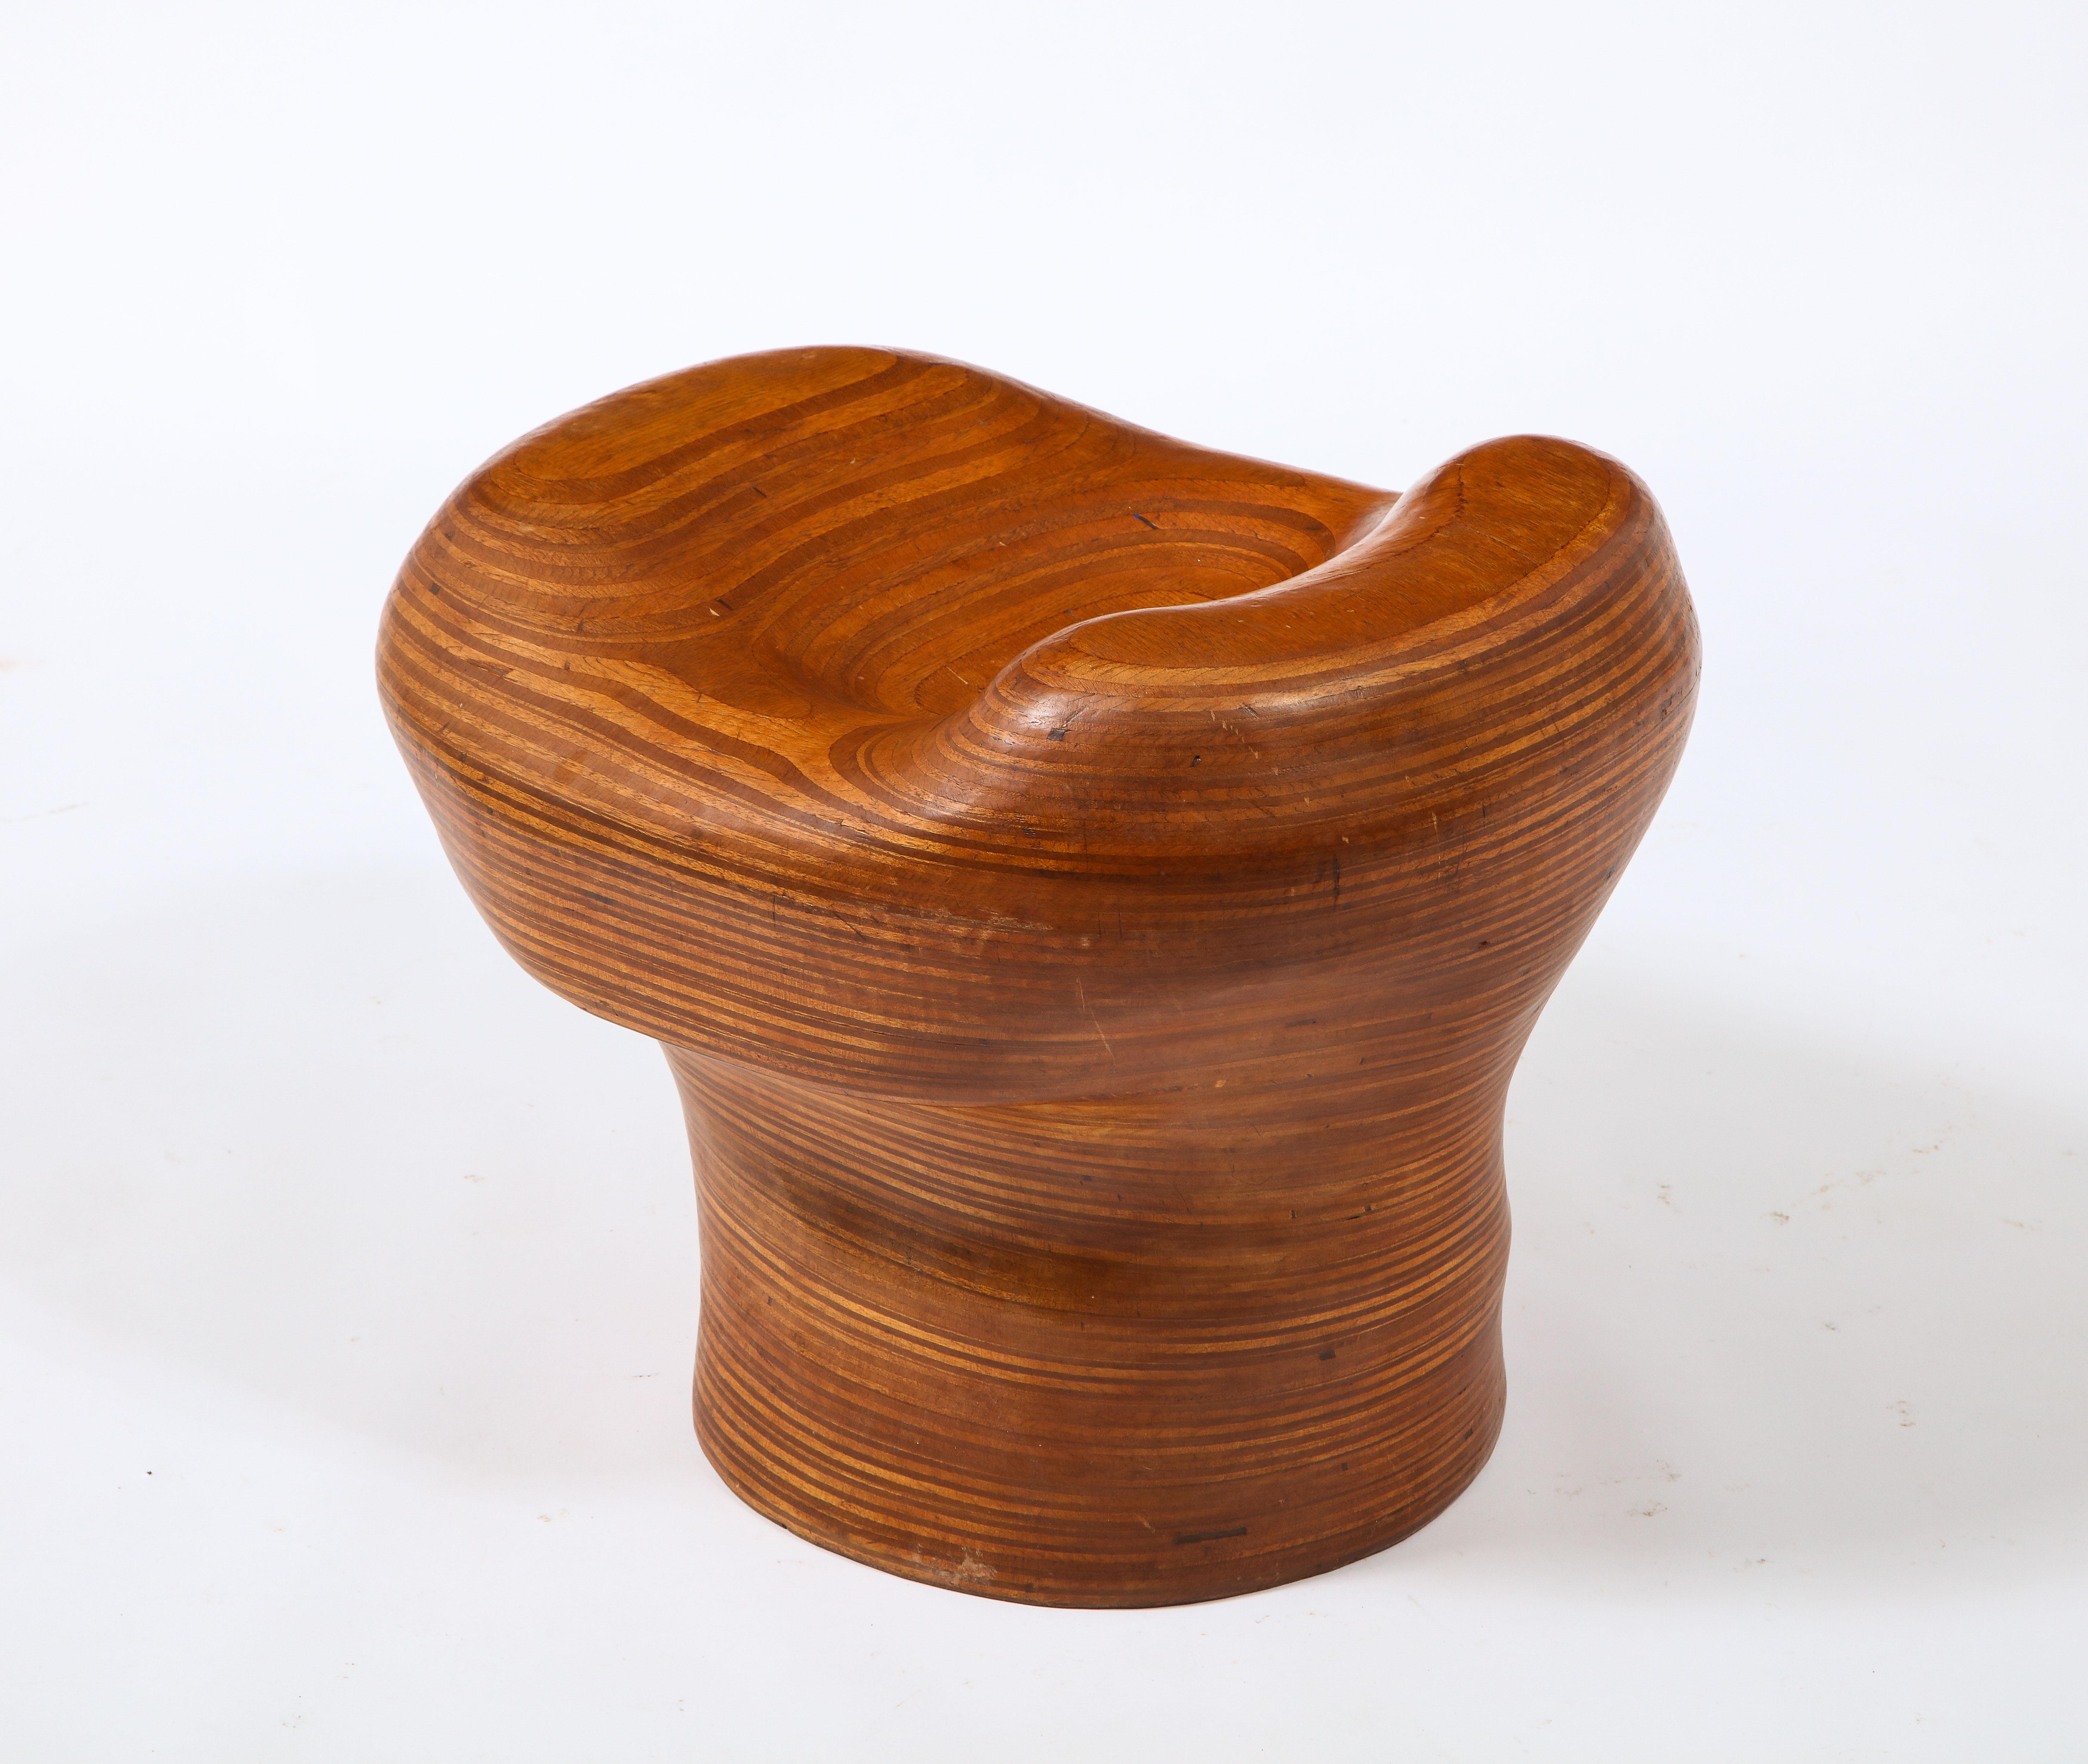 Denis Cospen Biomorphic Stool in Laminated Wood, France 1960's For Sale 9